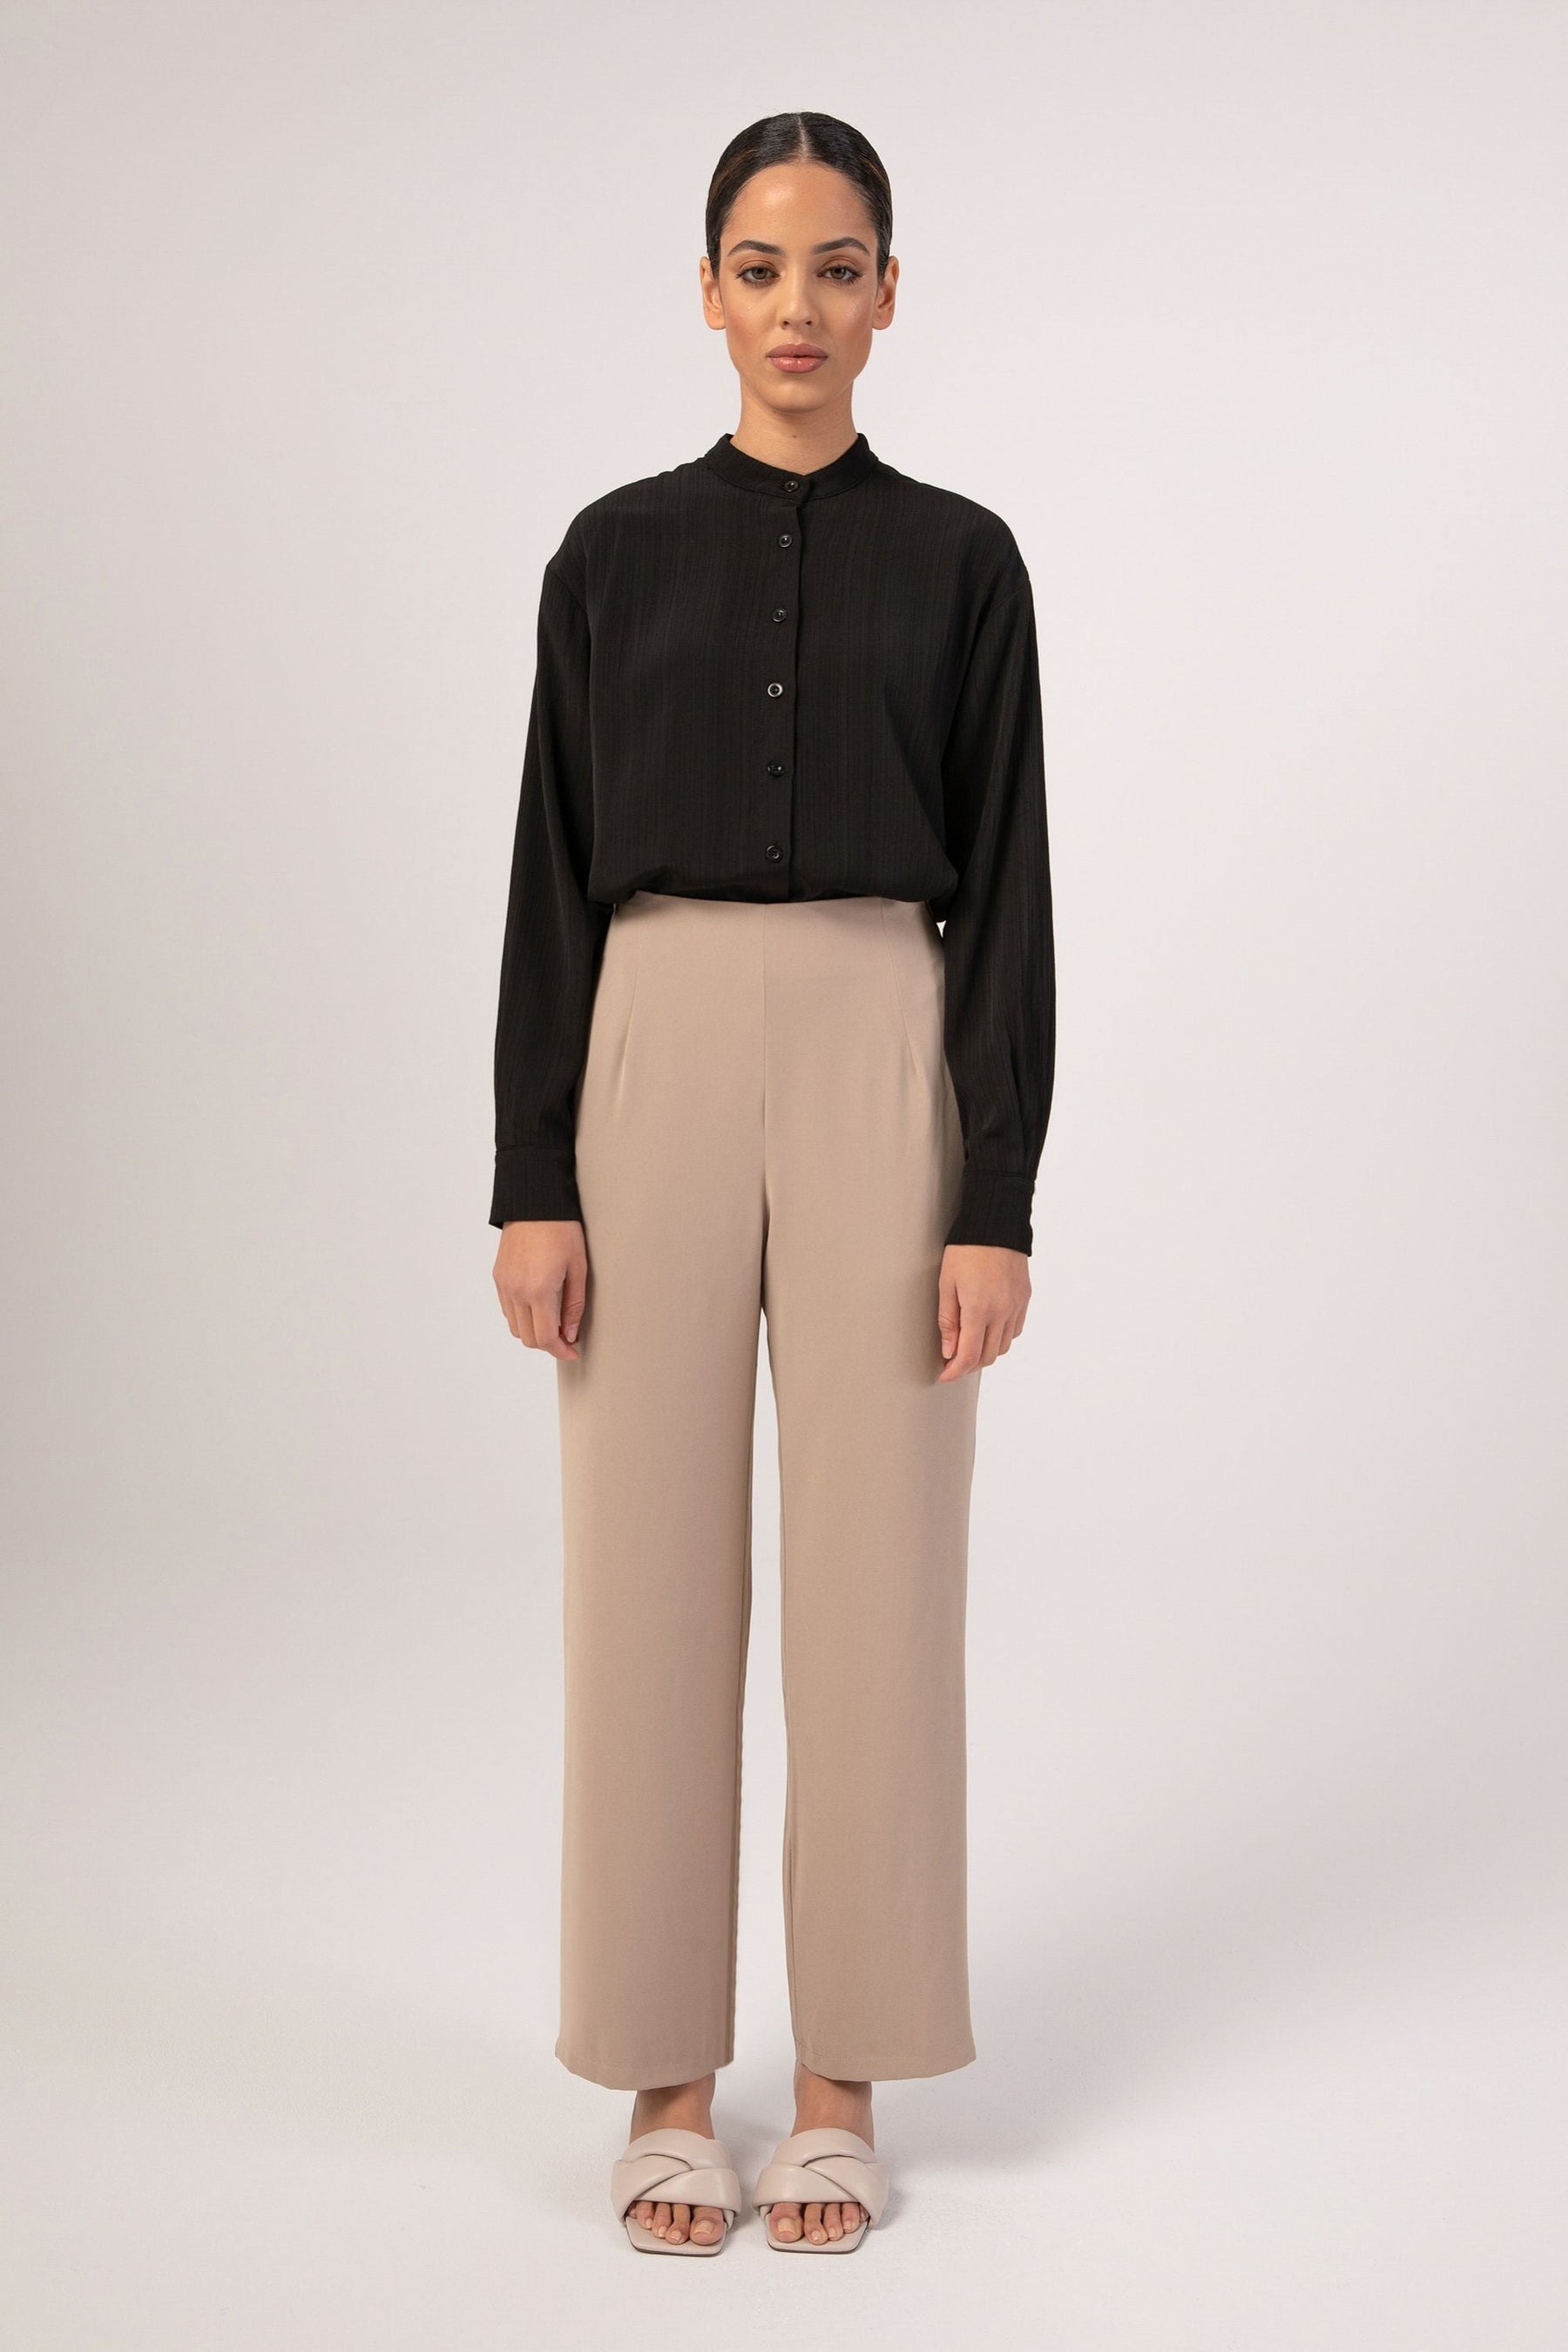 Seamless Waist Wide Leg Trousers - Sandstone Veiled Collection 